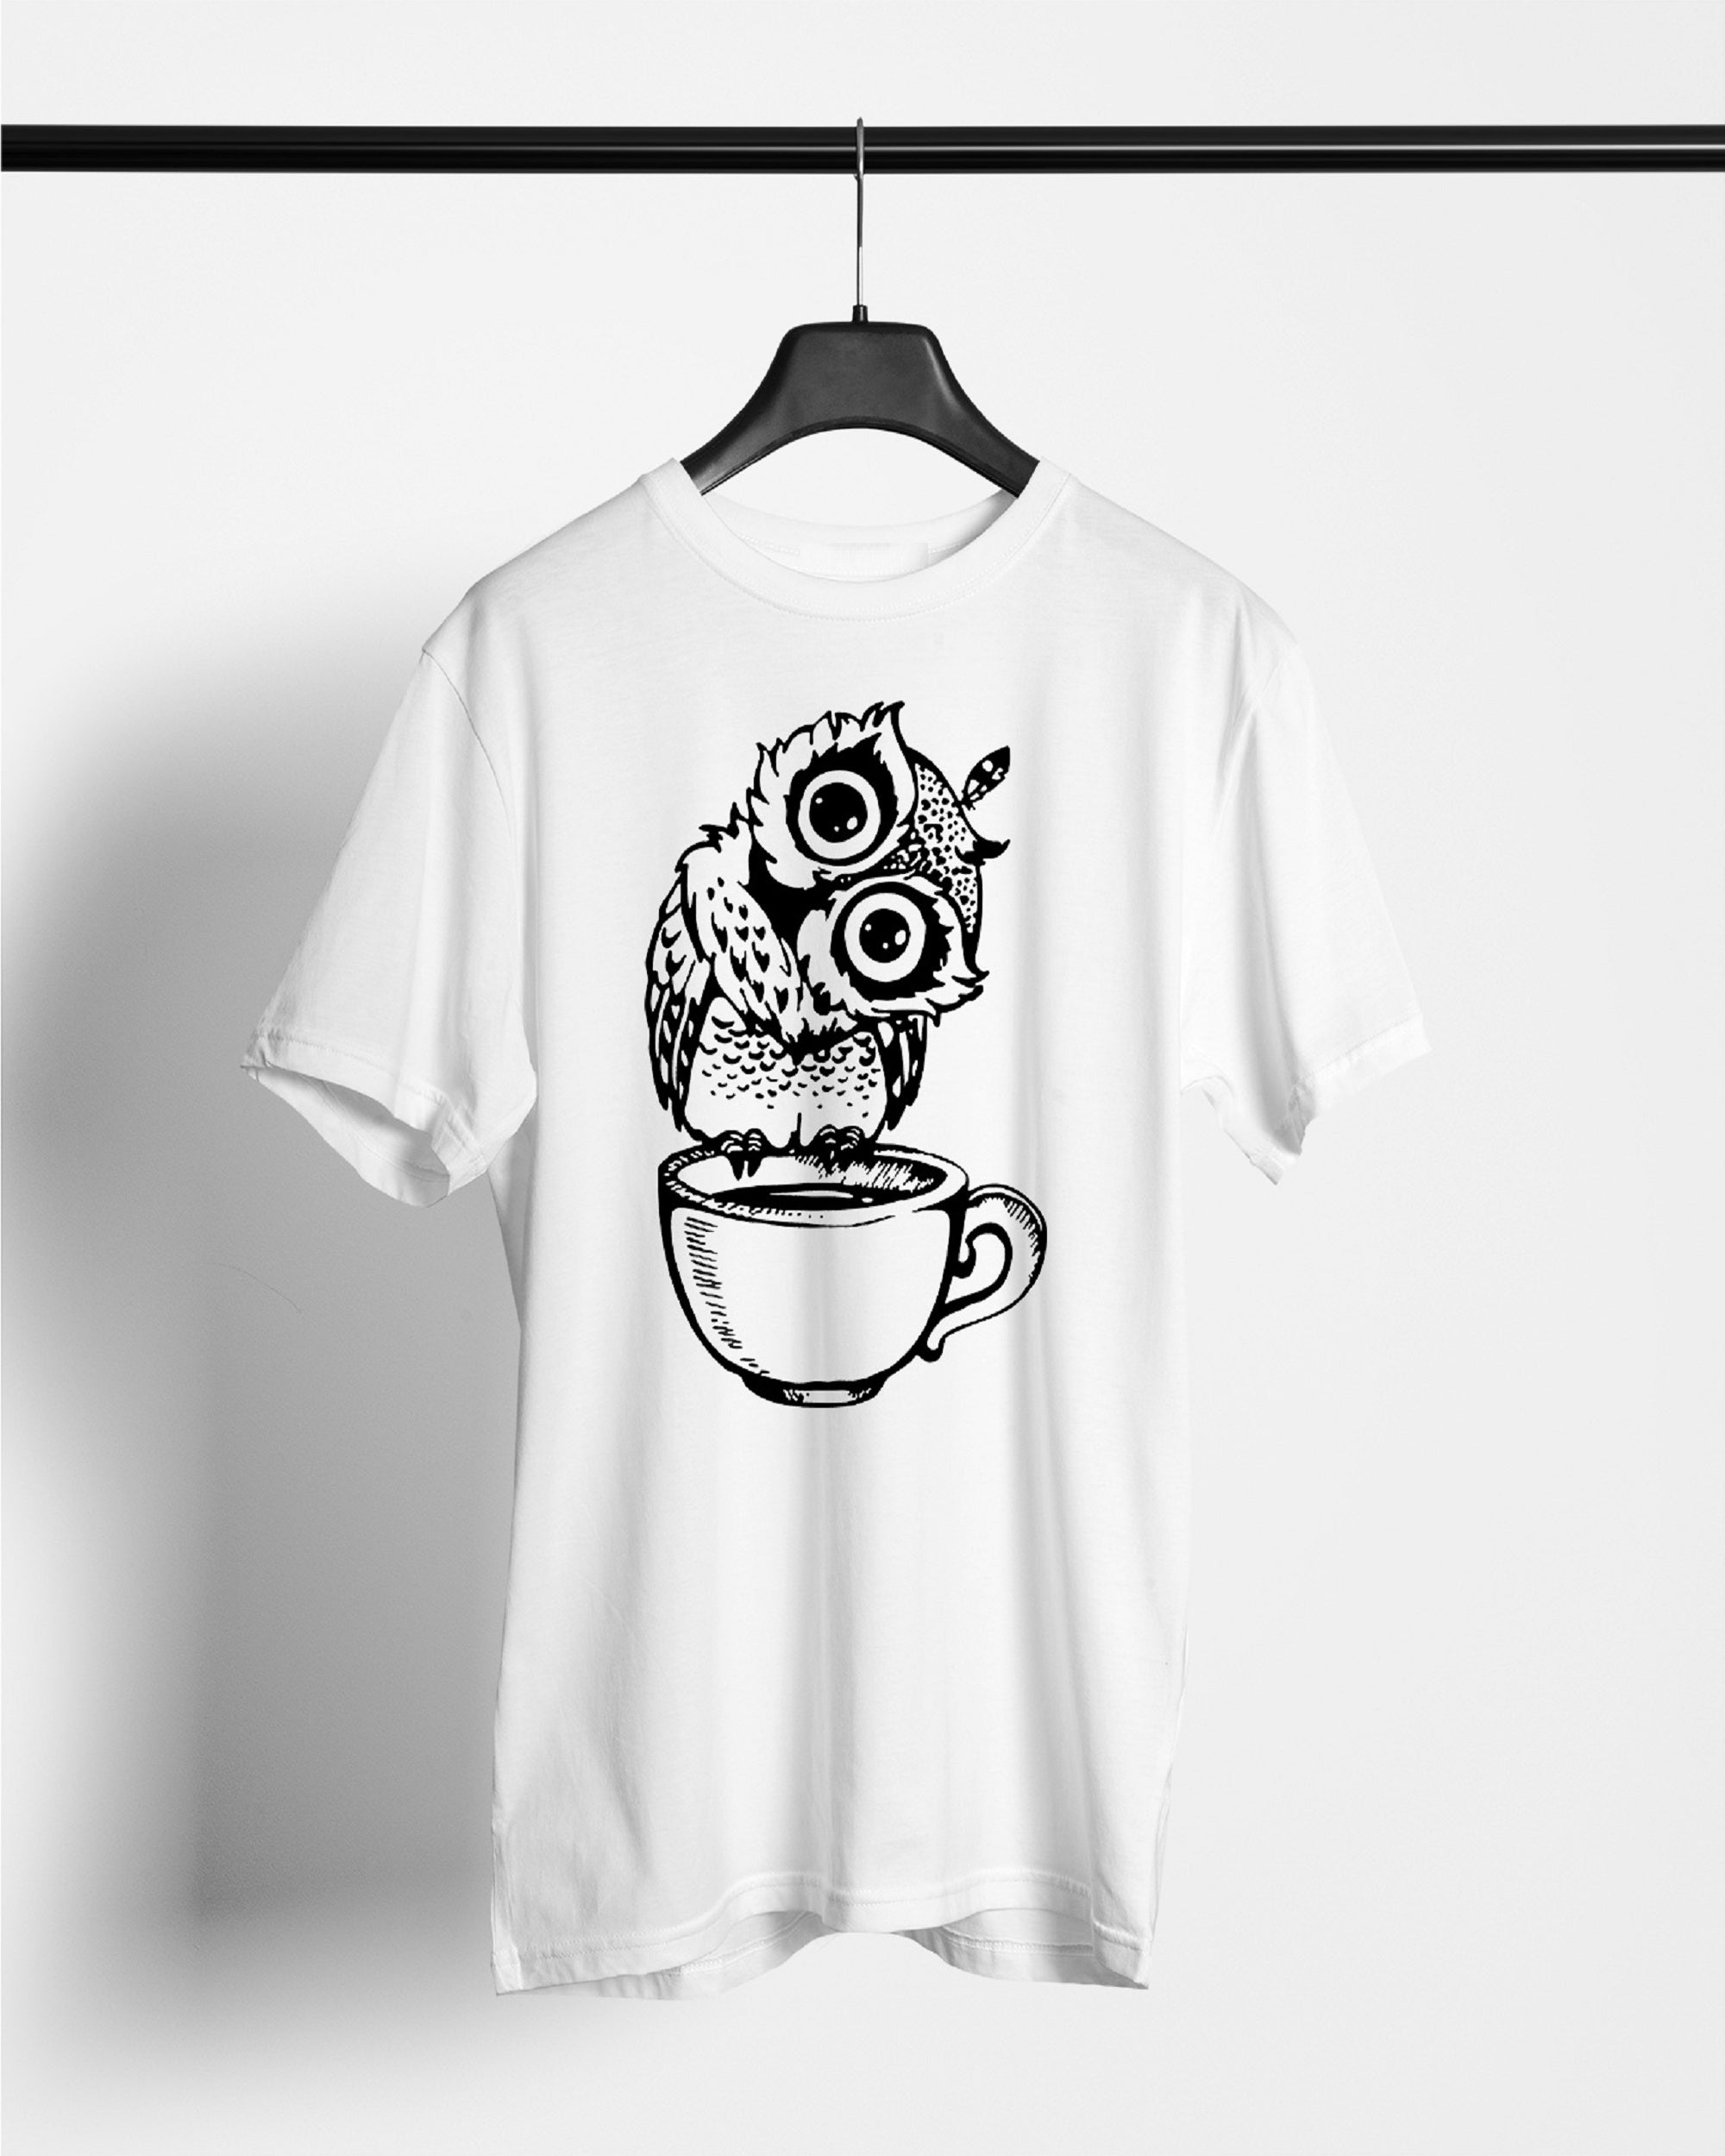 Owl With Coffee T-Shirts For Men || White || Stylish Tshirts || 100% Cotton || Best T-Shirt For Men's